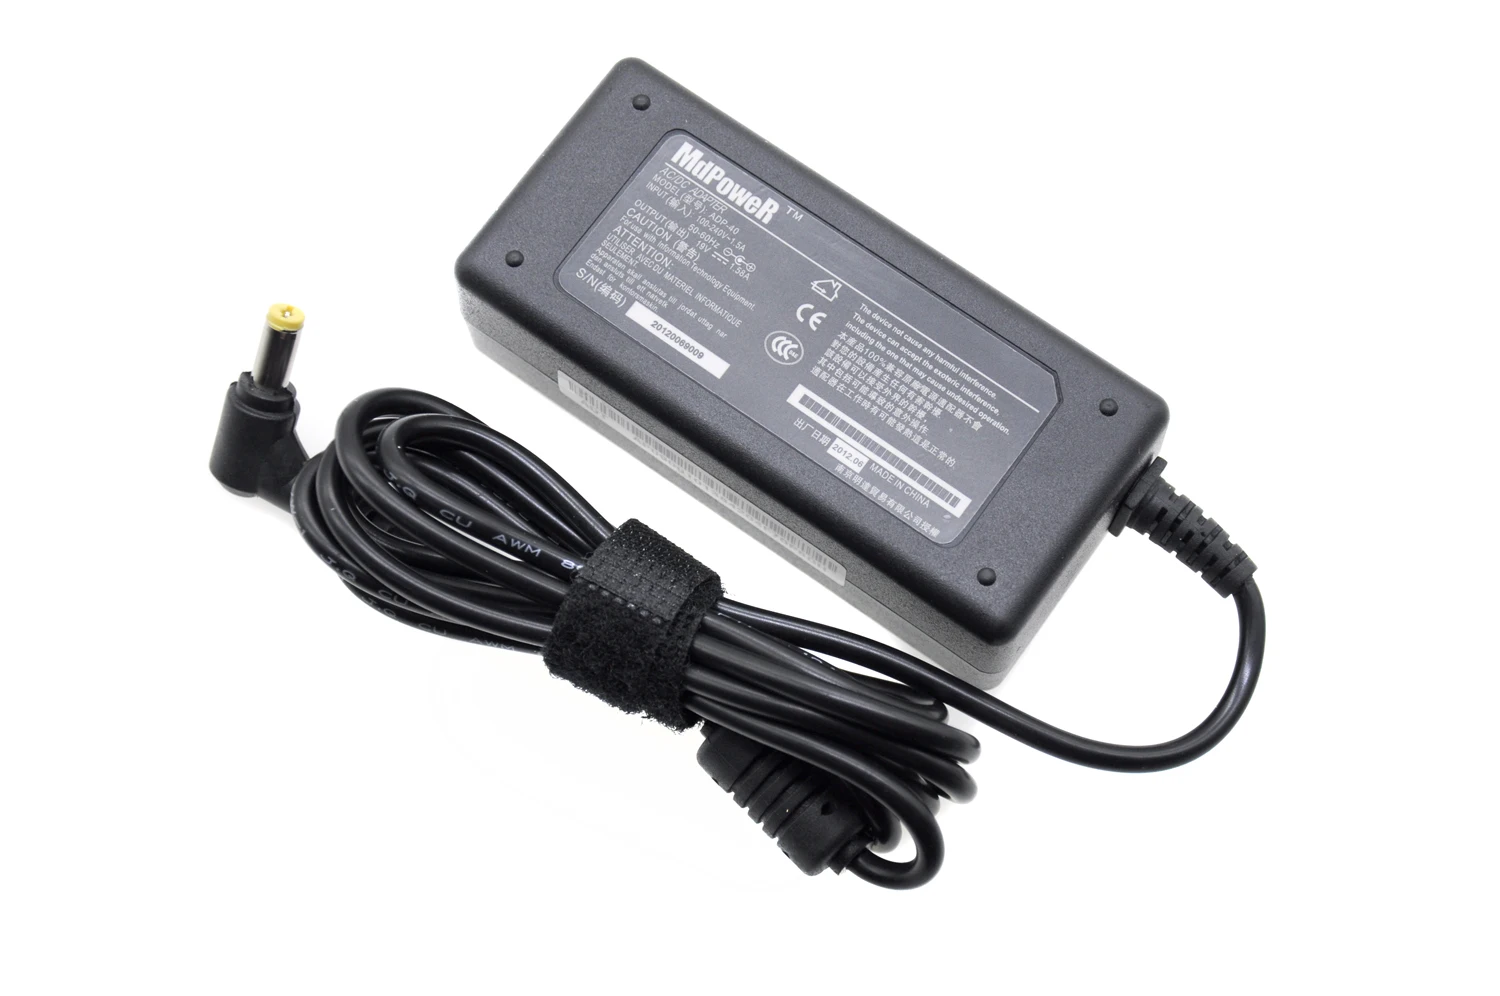 19V 1.58A FOR ACER LCD monitor AC adapter Power supply S220HQL G196WL S190WL G206HQL S242HL G236HL S235HL G227HQL S200HQL V195WL